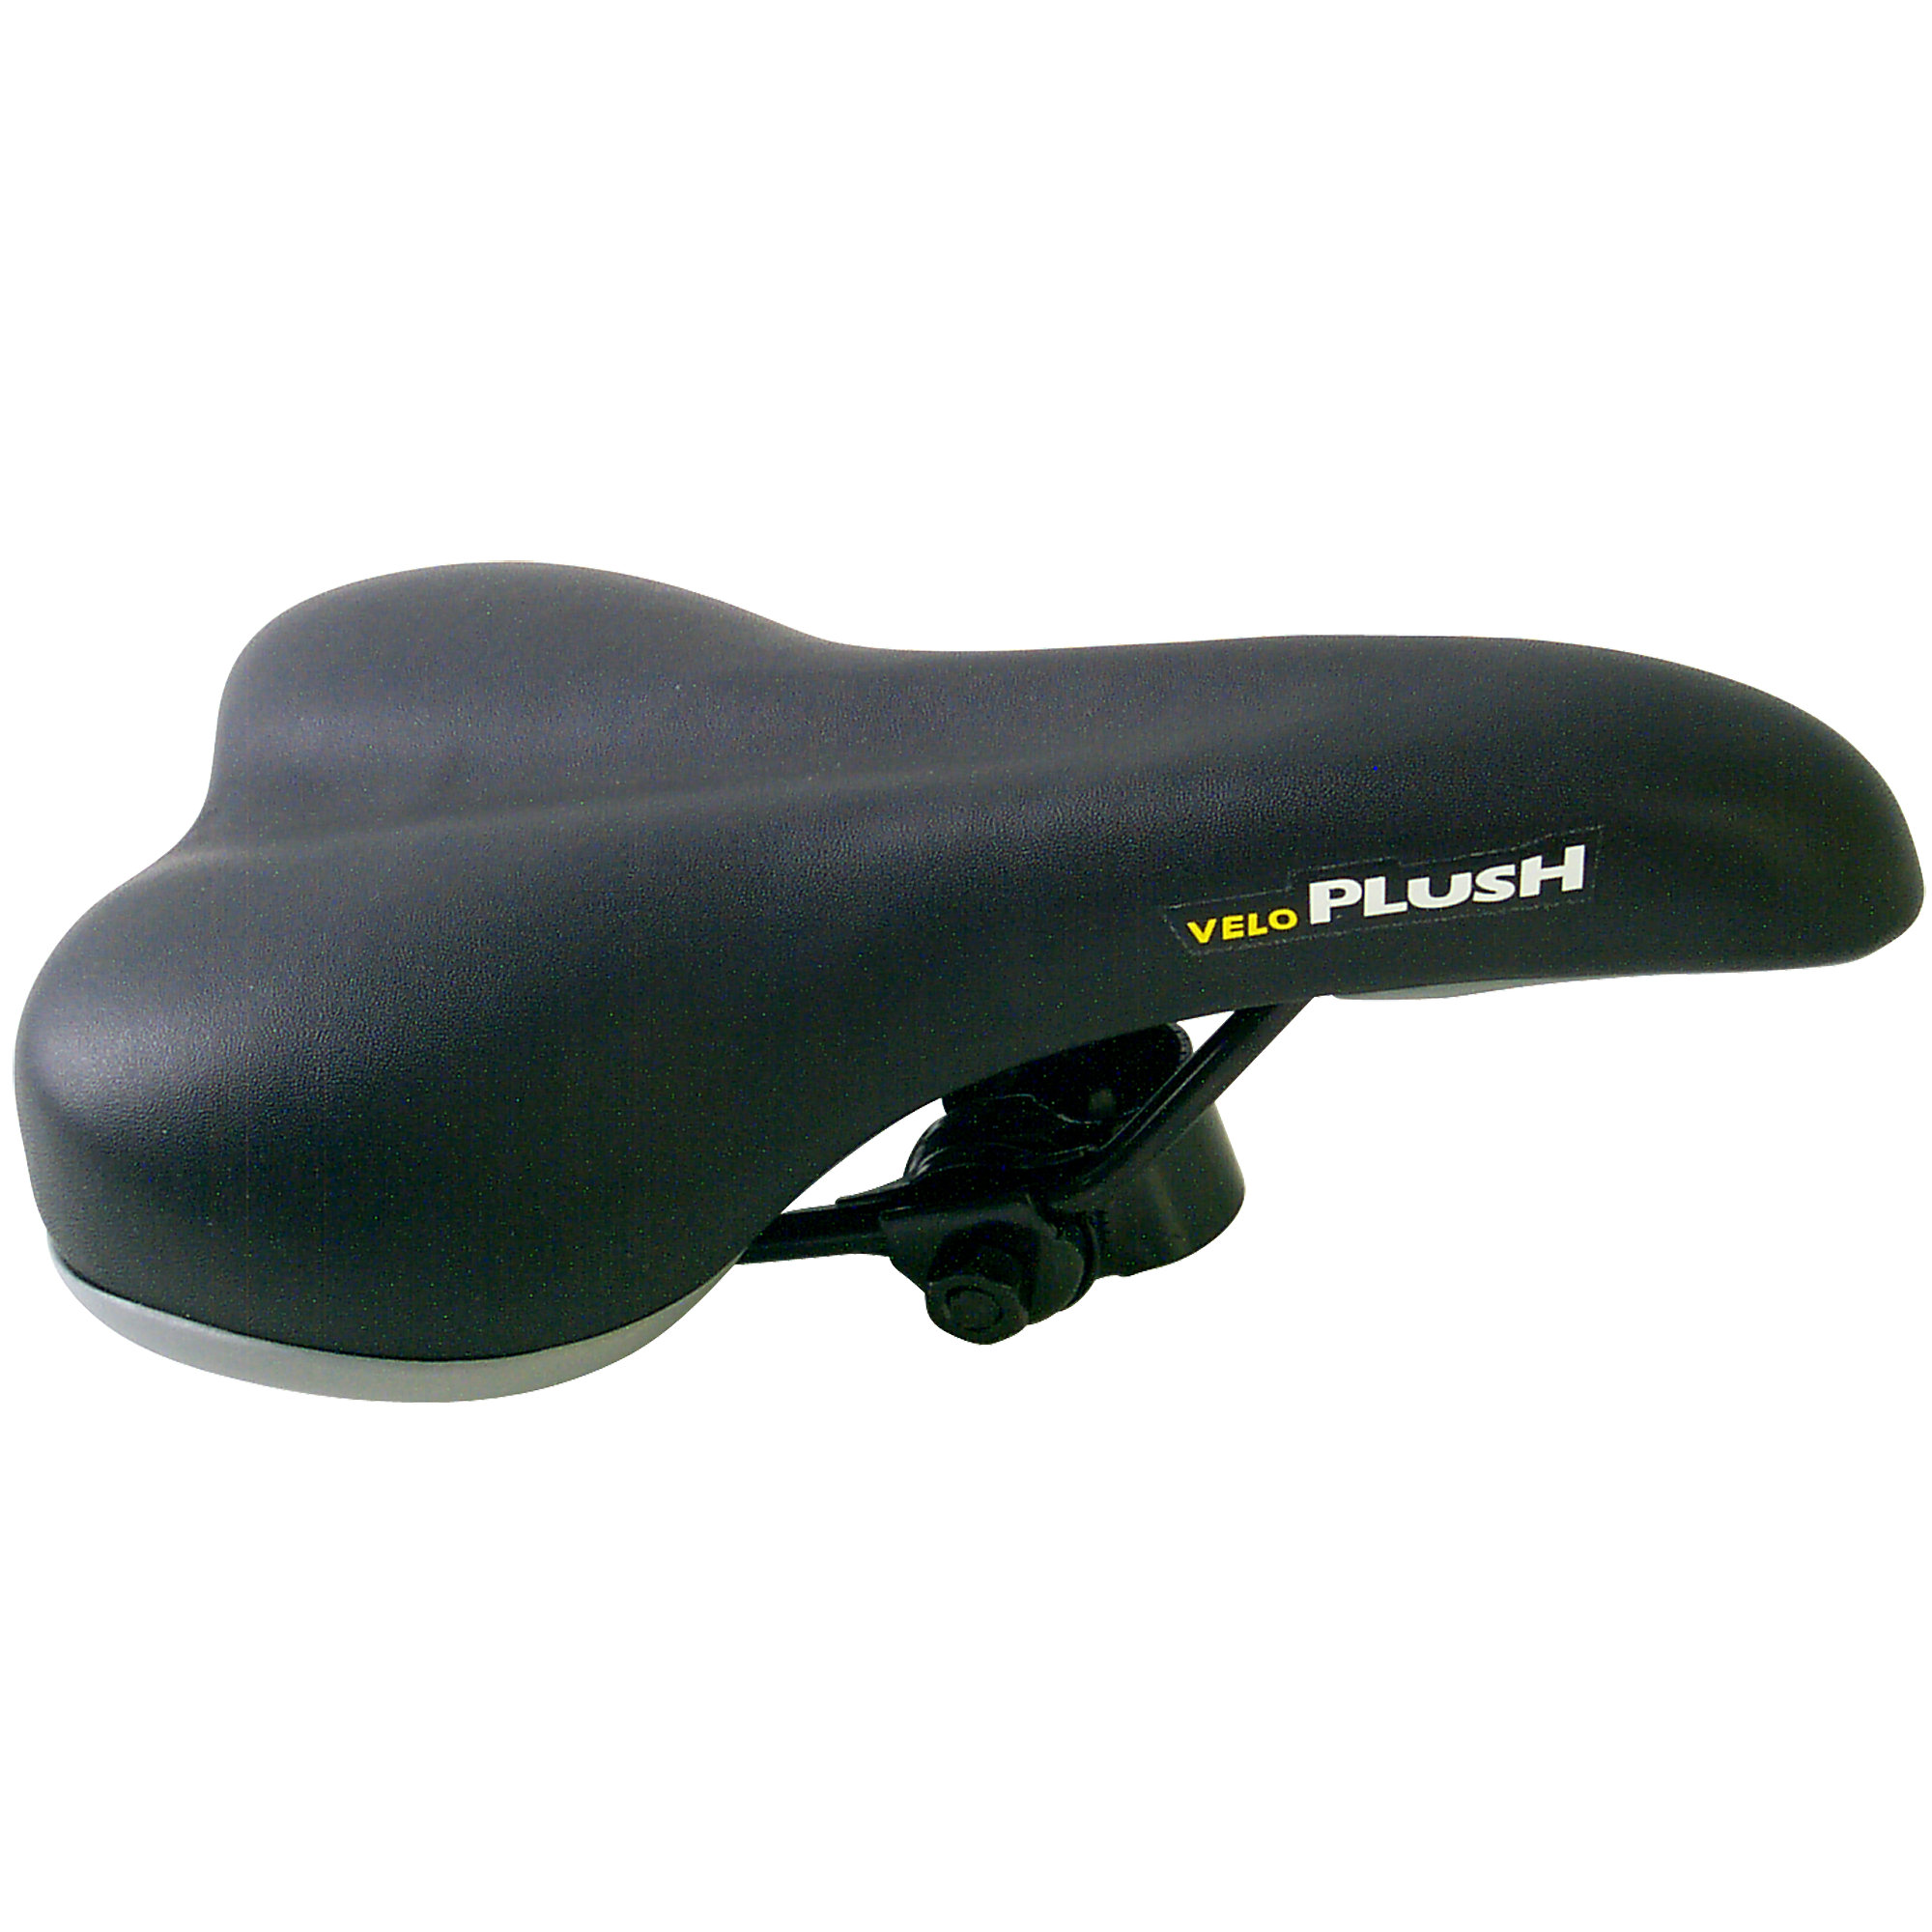 Bike Seat with Seat Clamp for Star Trac Indoor Cycles